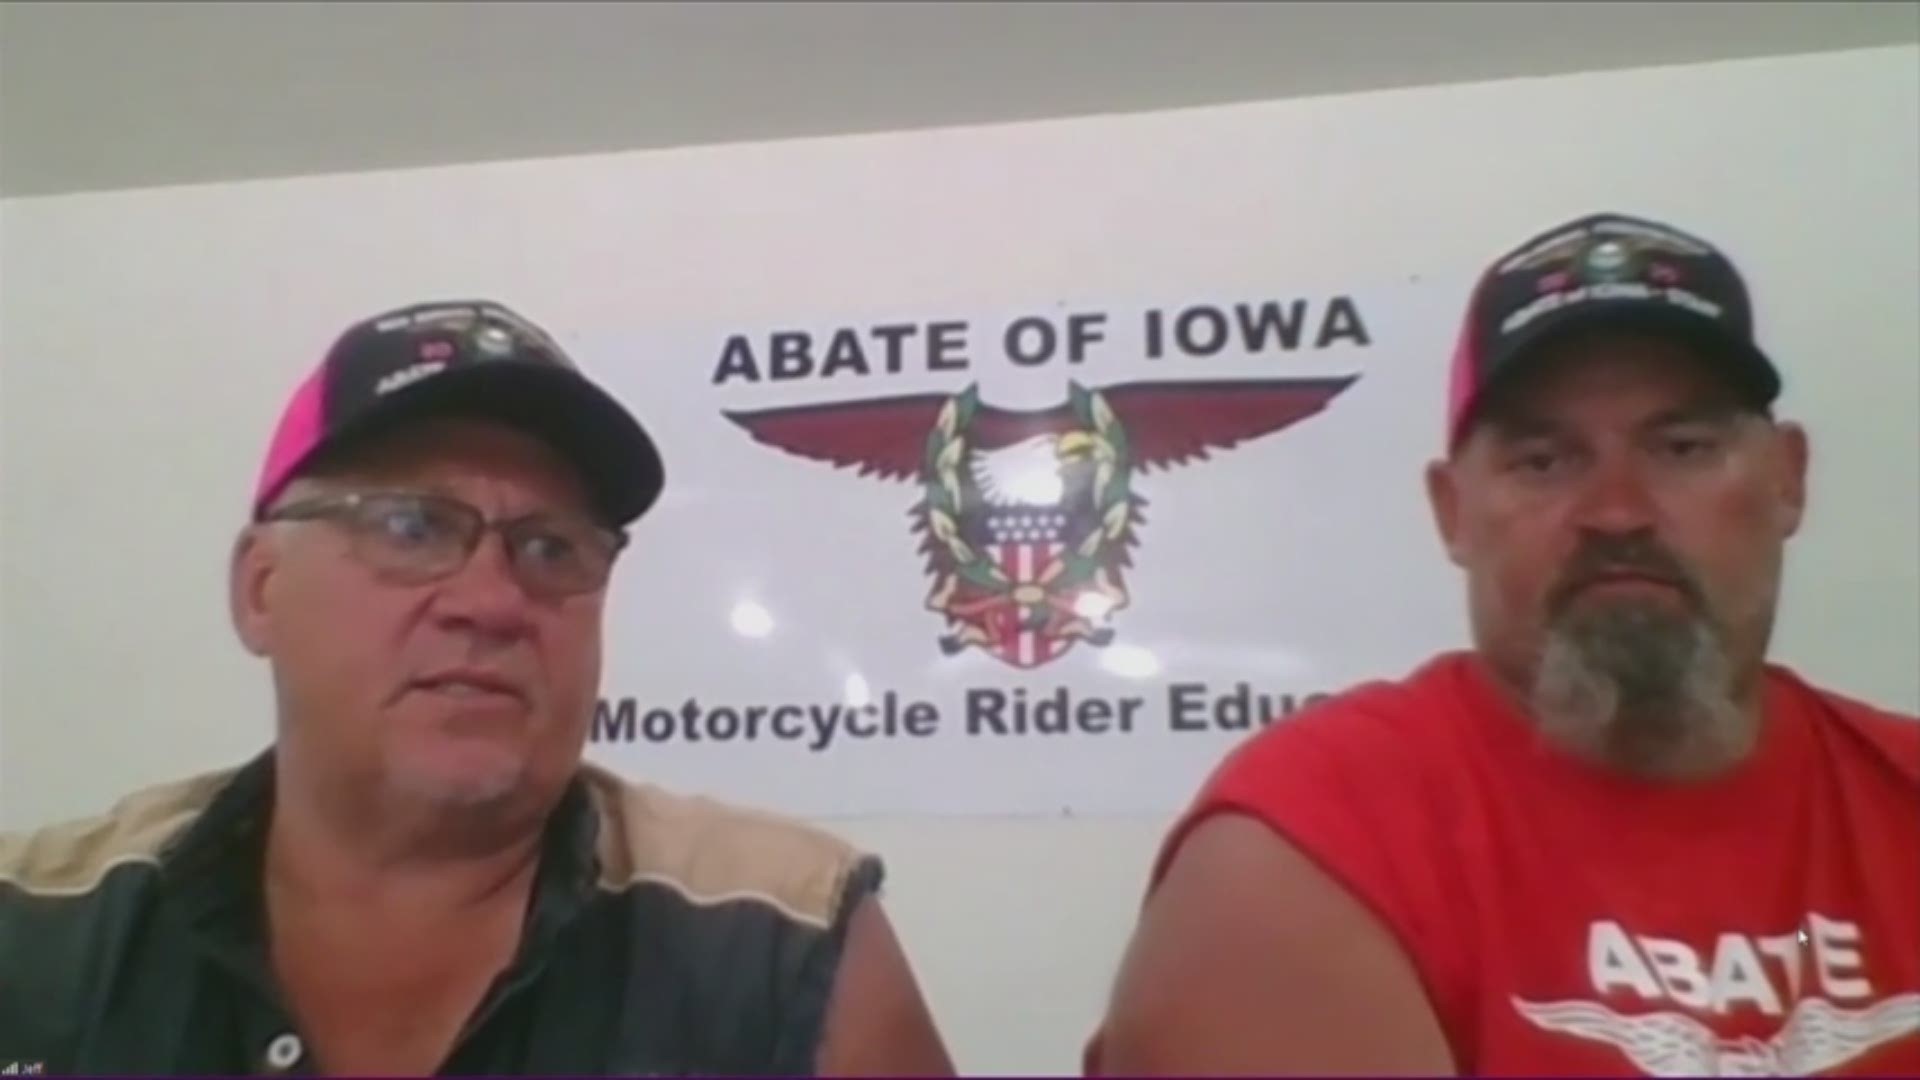 The A.B.A.T.E. of Iowa Freedom Rally is still going on as scheduled this week